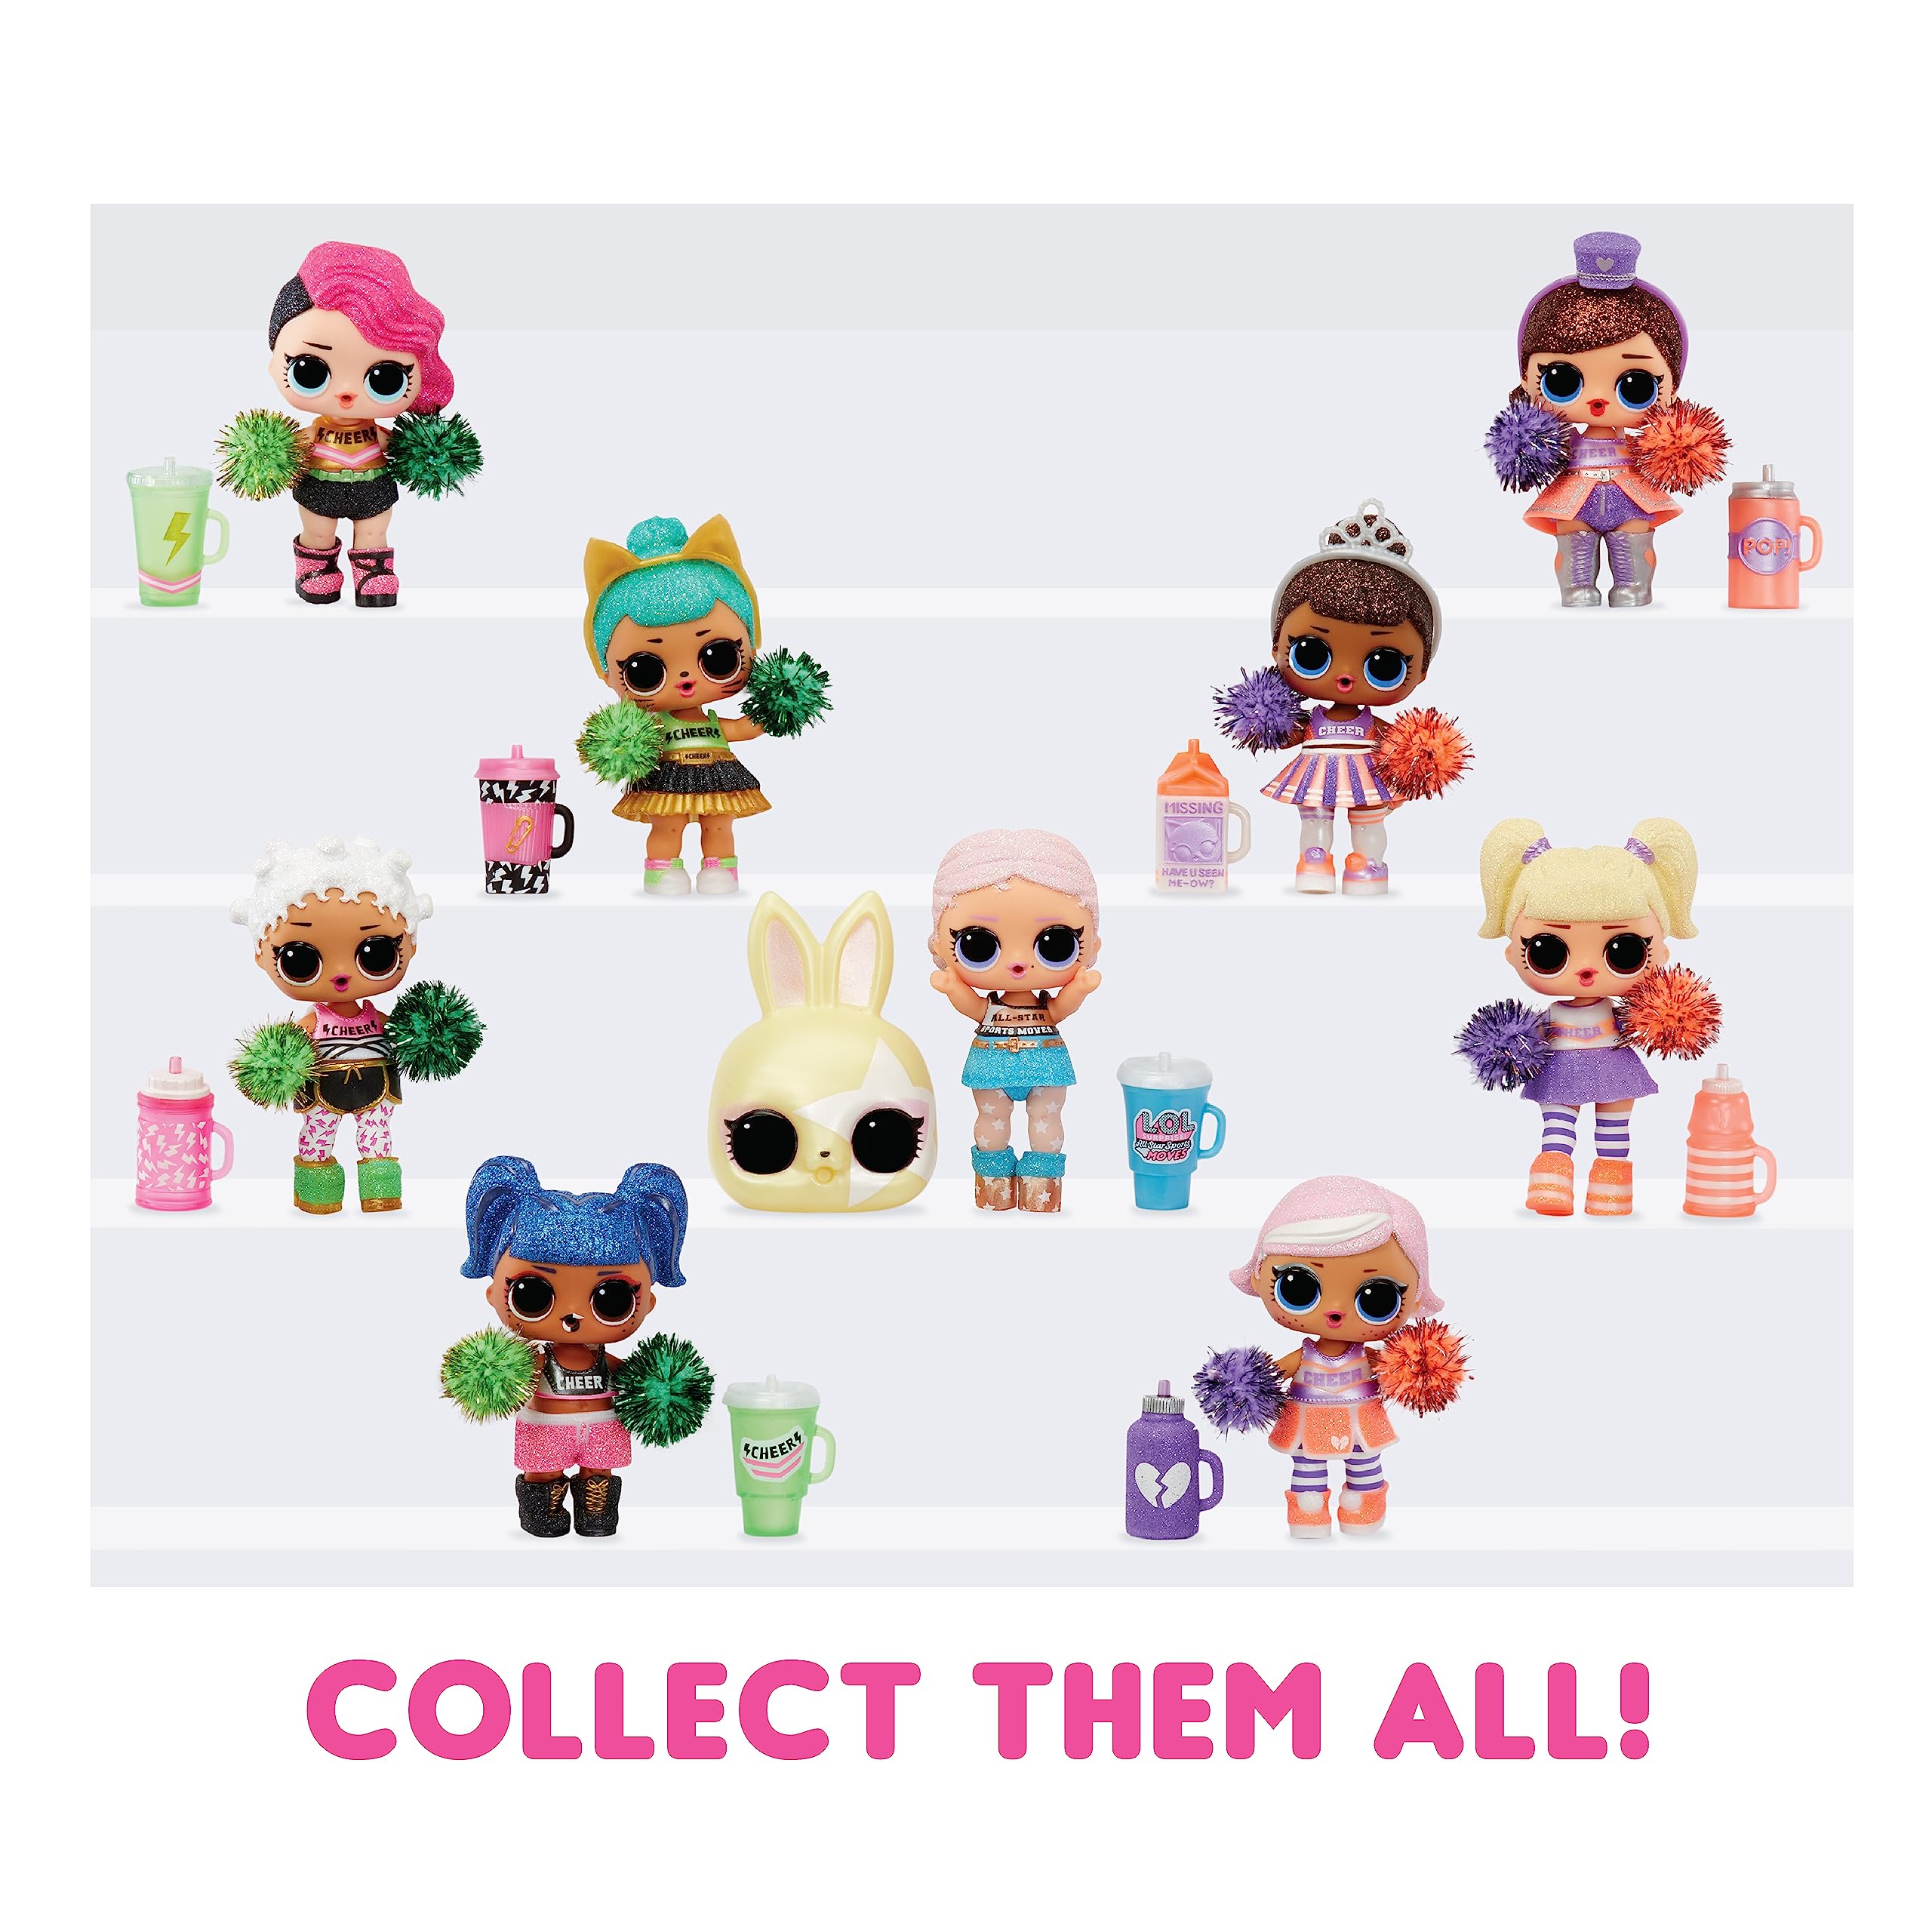 LOL Surprise All Star Sports Moves - Cheer- Surprise Doll, Sports Theme, Cheerleading Dolls, Mix and Match Outfits, Shoes, Accessories, Limited Edition Doll, Collectible Doll - Gift for Girls Age 4+